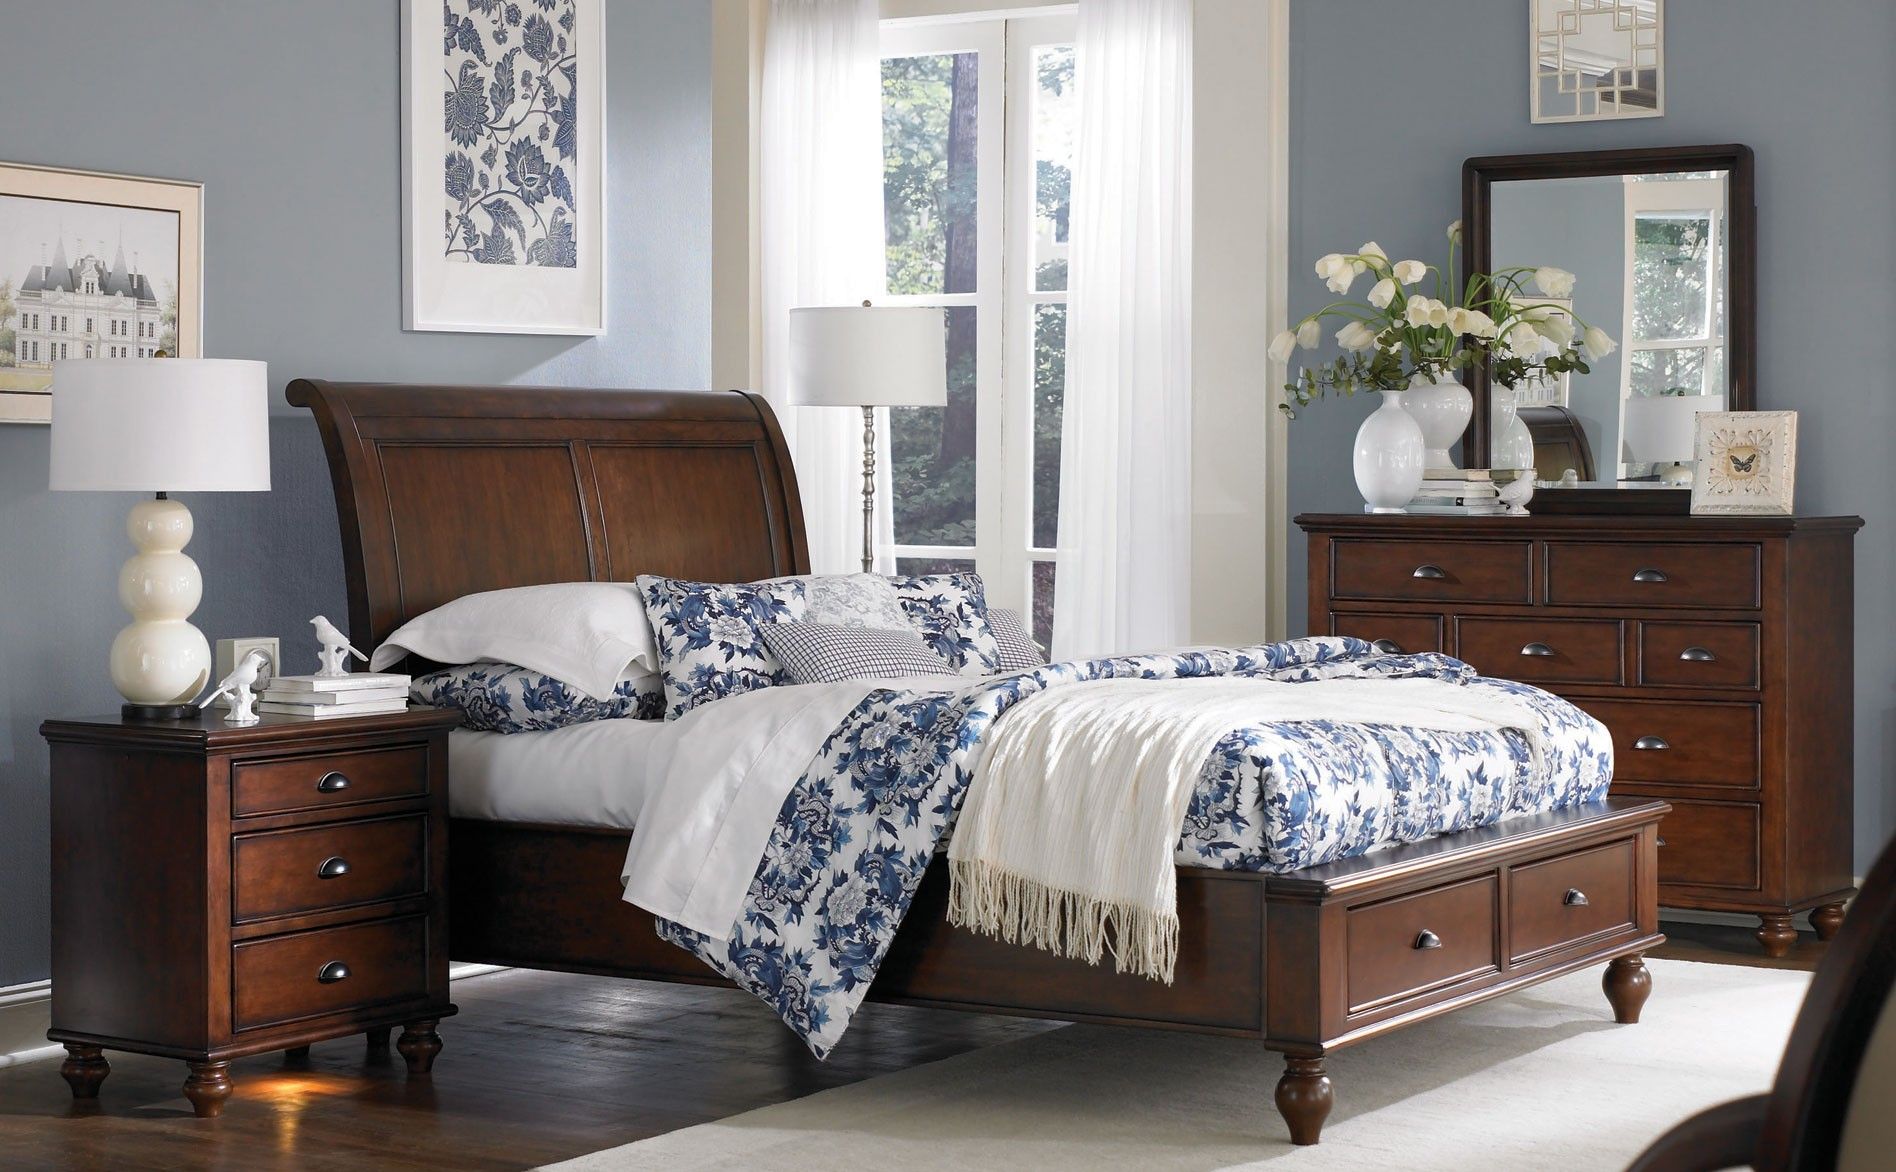 What Colors Go With Cherry Wood Bedroom Furniture: Stylish Color Combinations